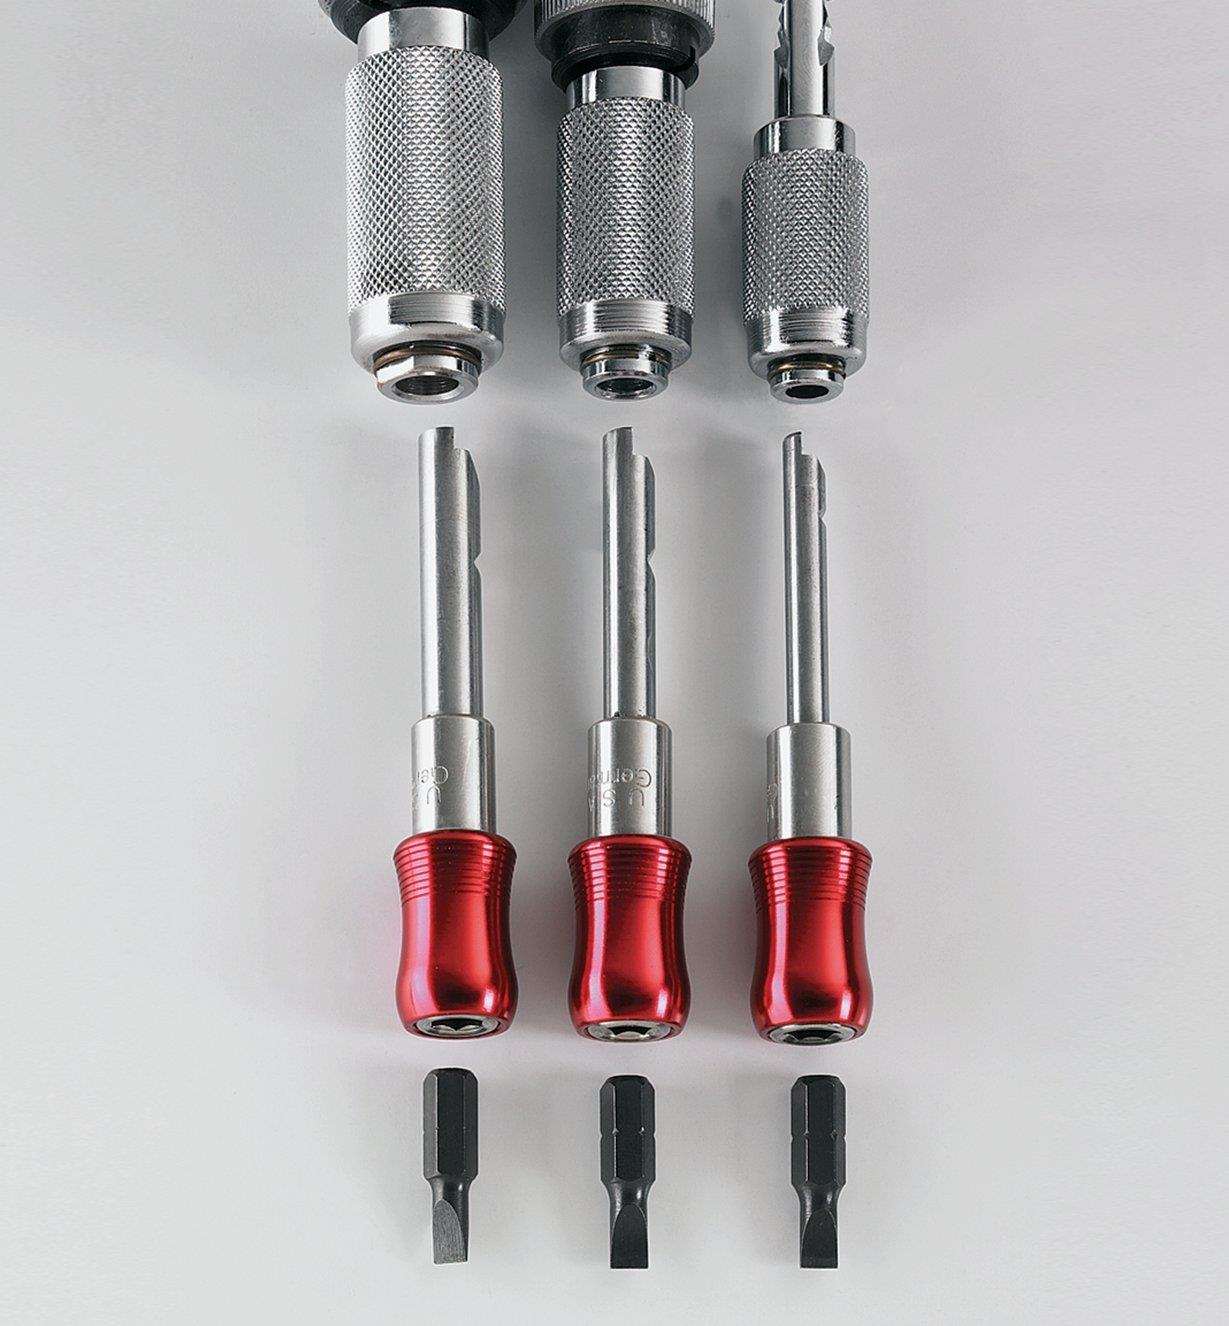 Hex Adapter for Yankee Screwdrivers